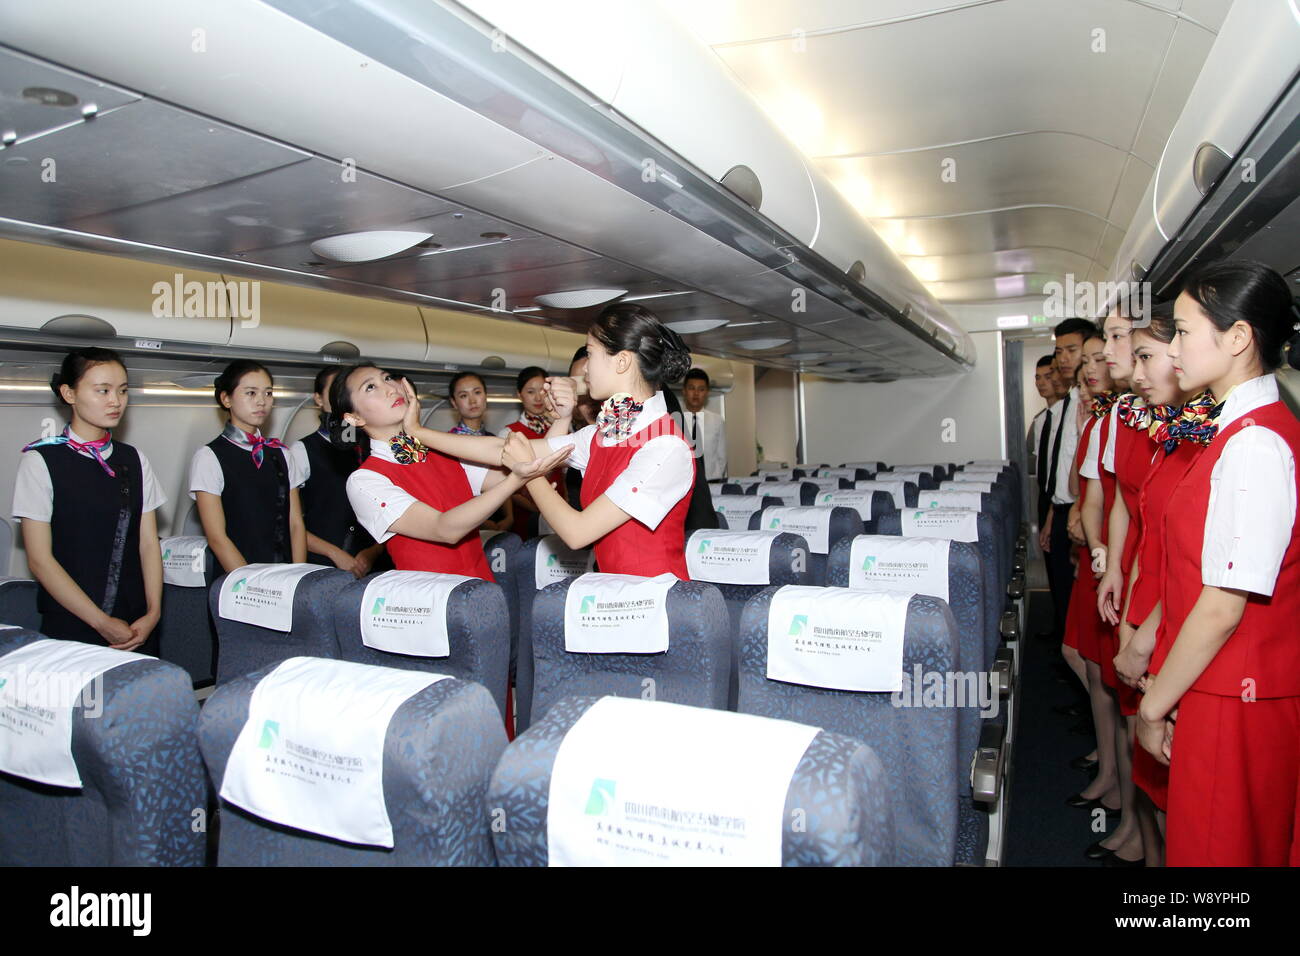 Young Chinese students dressed air hostess uniforms learn Wing Chun, a concept-based Chinese martial art, onboard a mock Airbus A330 cabin at Sichuan Stock Photo